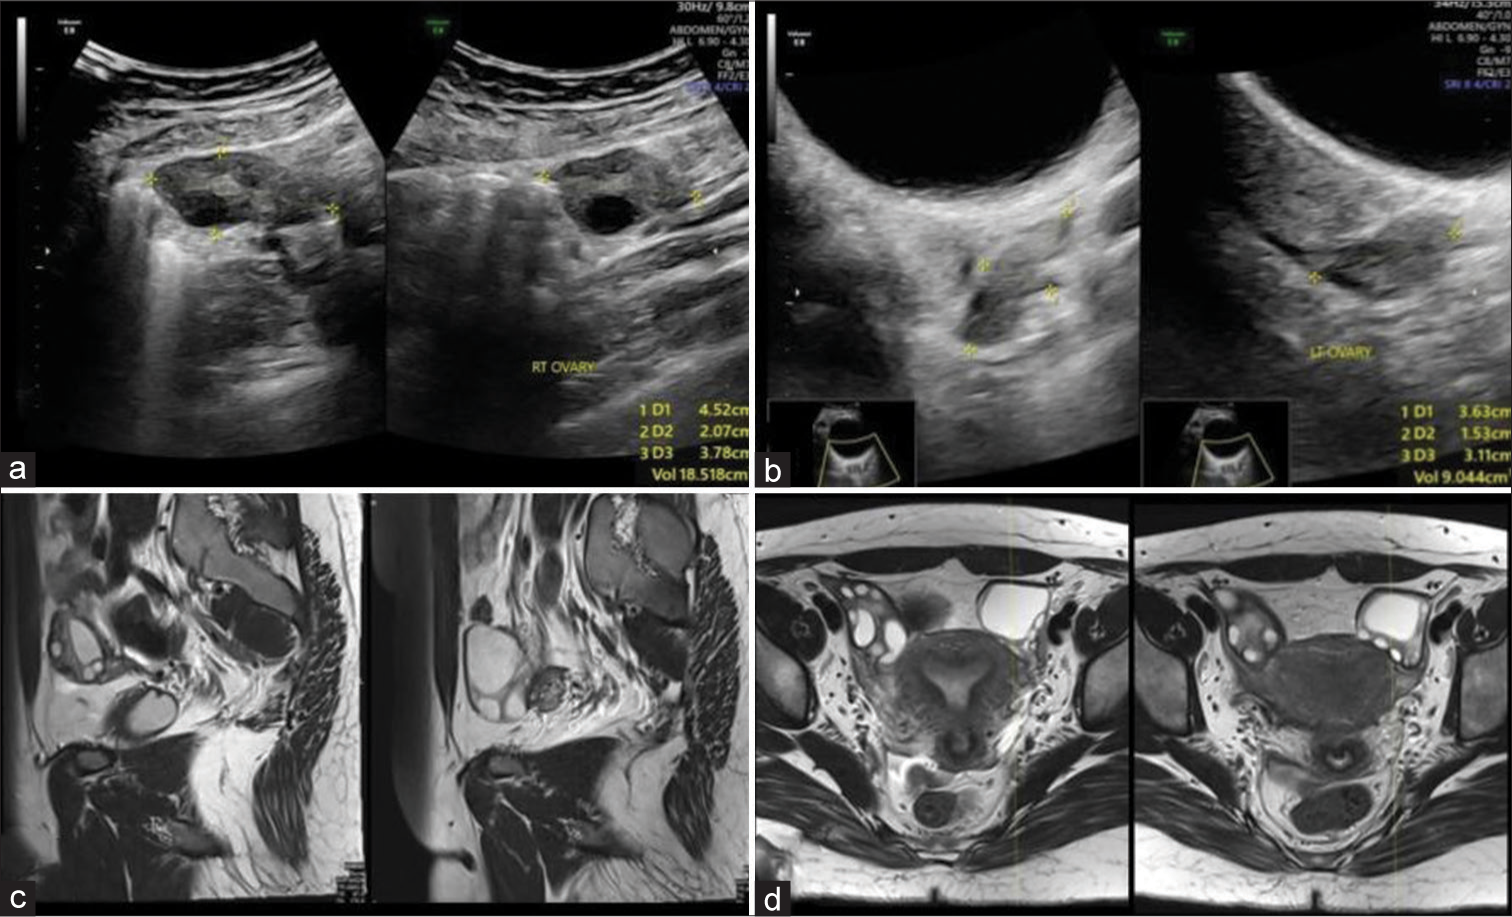 A 19-year-old female presented with ovarian hyperstimulation syndrome (OHSS) who had presented with severe abdominal pain, diagnosed as OHSS, on follow-up (a and b) Ultrasound images demonstrating the normal size and morphology of both ovaries at 5 month follow-up (c and d) sagittal and axial T2-weighted magnetic resonance imaging section of the pelvis re-demonstrating ultrasound findings suggesting complete resolution.